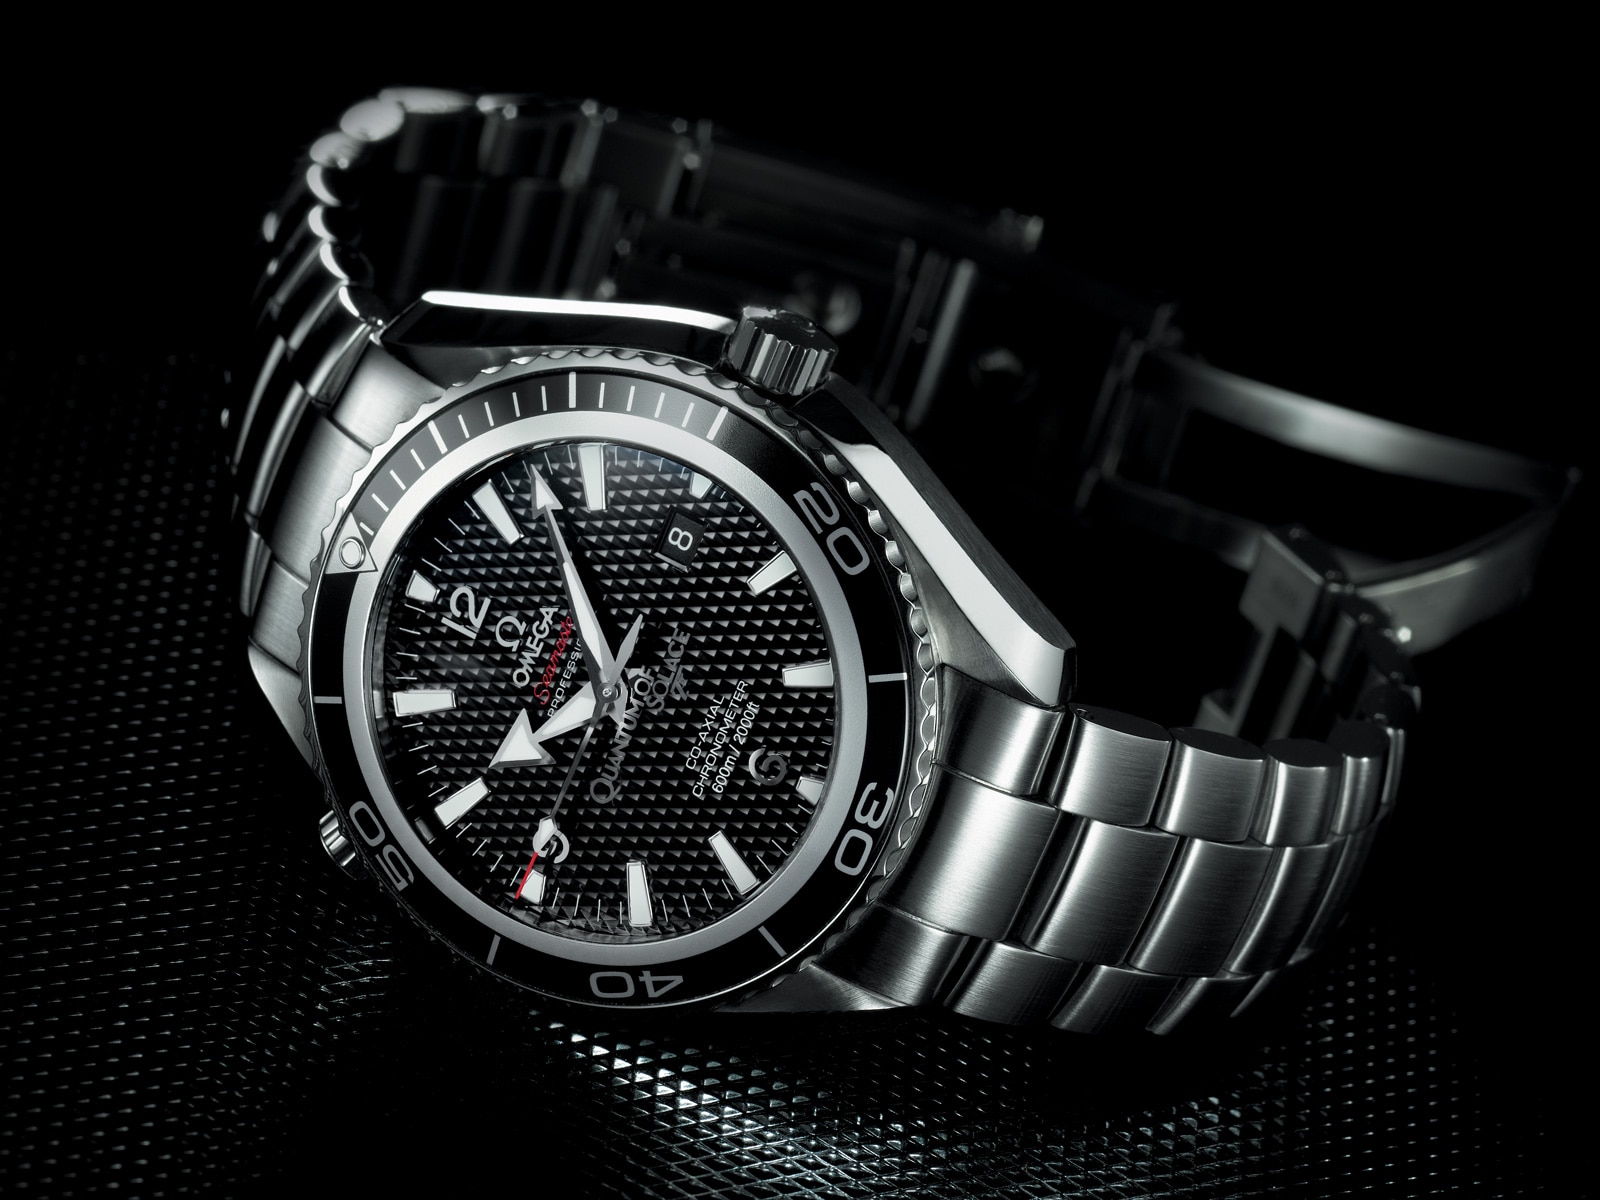 James Bond "Quantum Of Solace" Omega Seamaster Watch Limited Edition